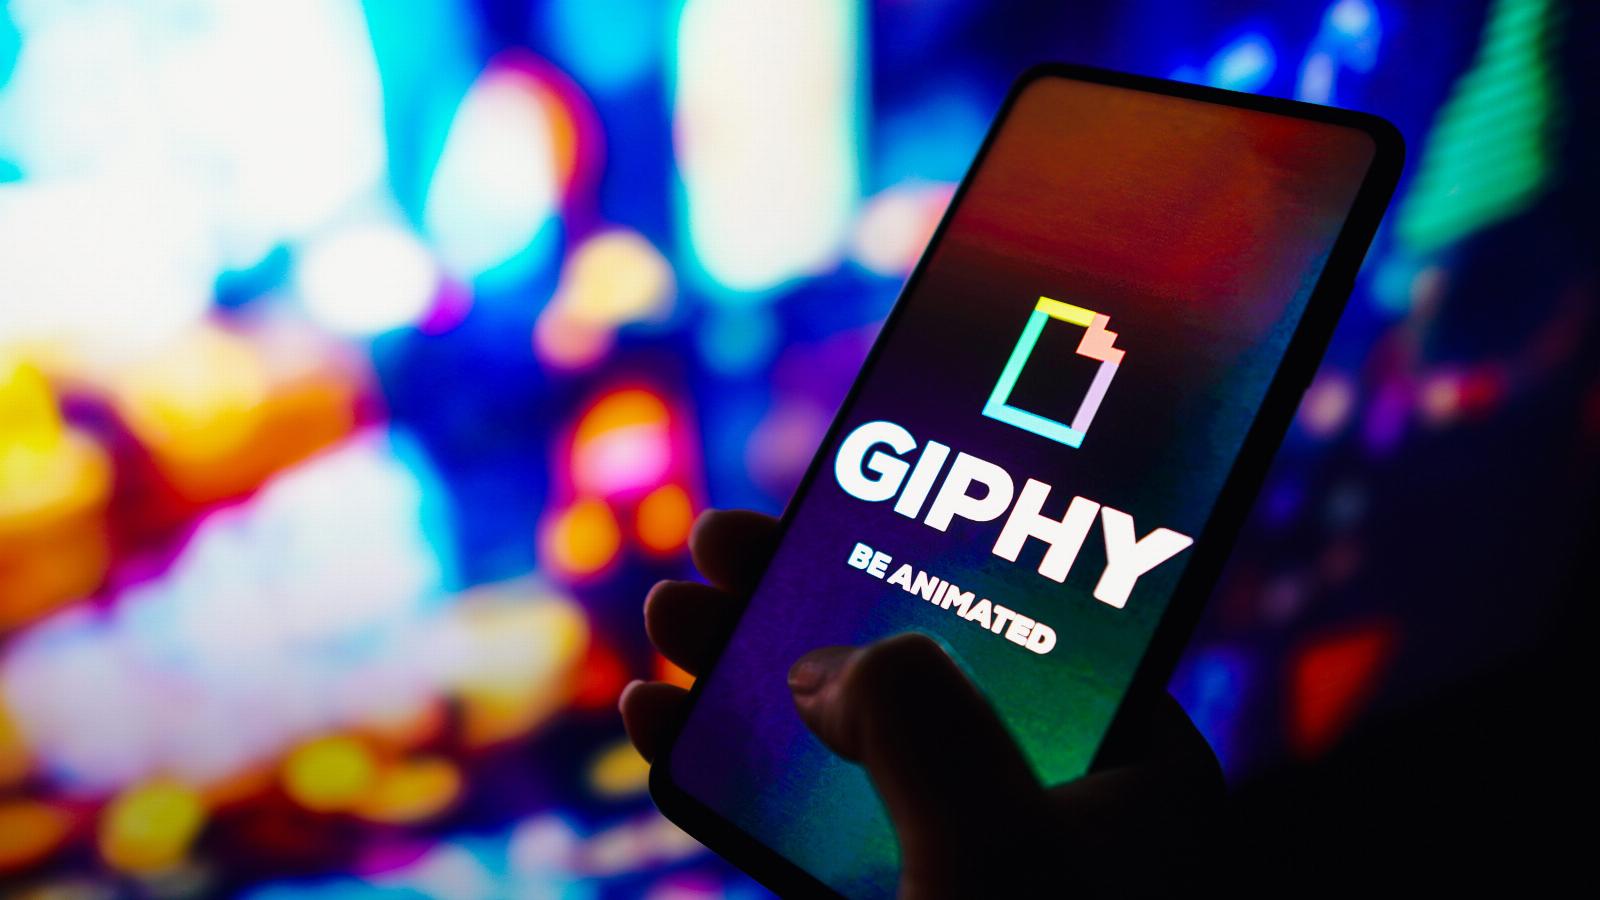 Following UK antitrust order, Meta sells Giphy to Shutterstock for $53M after buying it for $400M